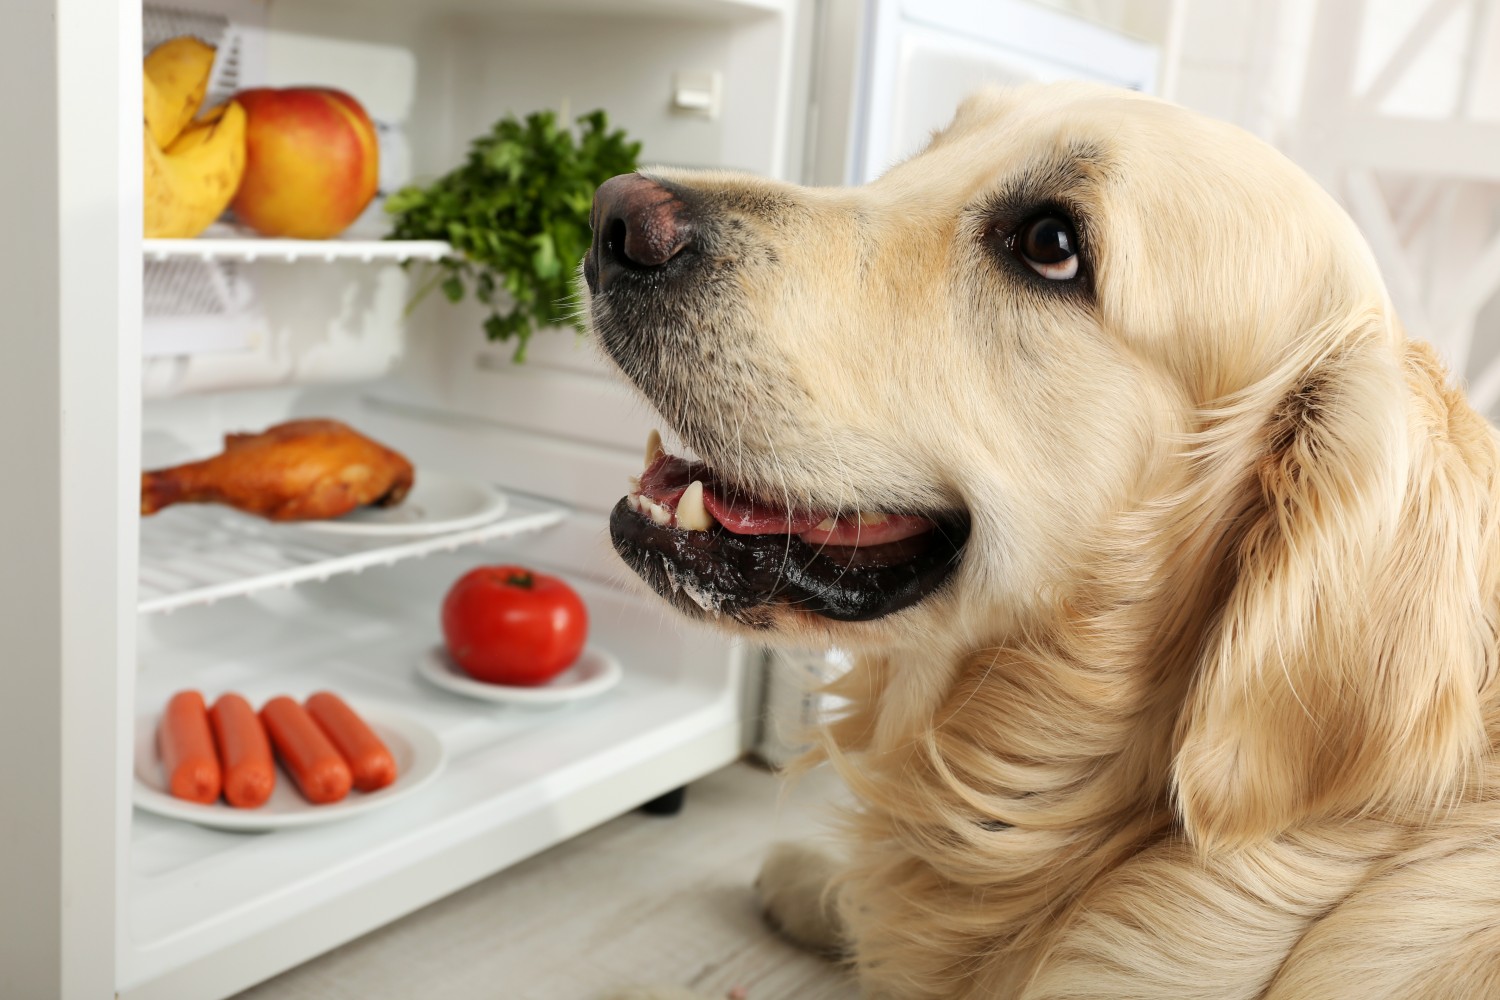 Dog Sitting Next to an Open Refrigerator With Food